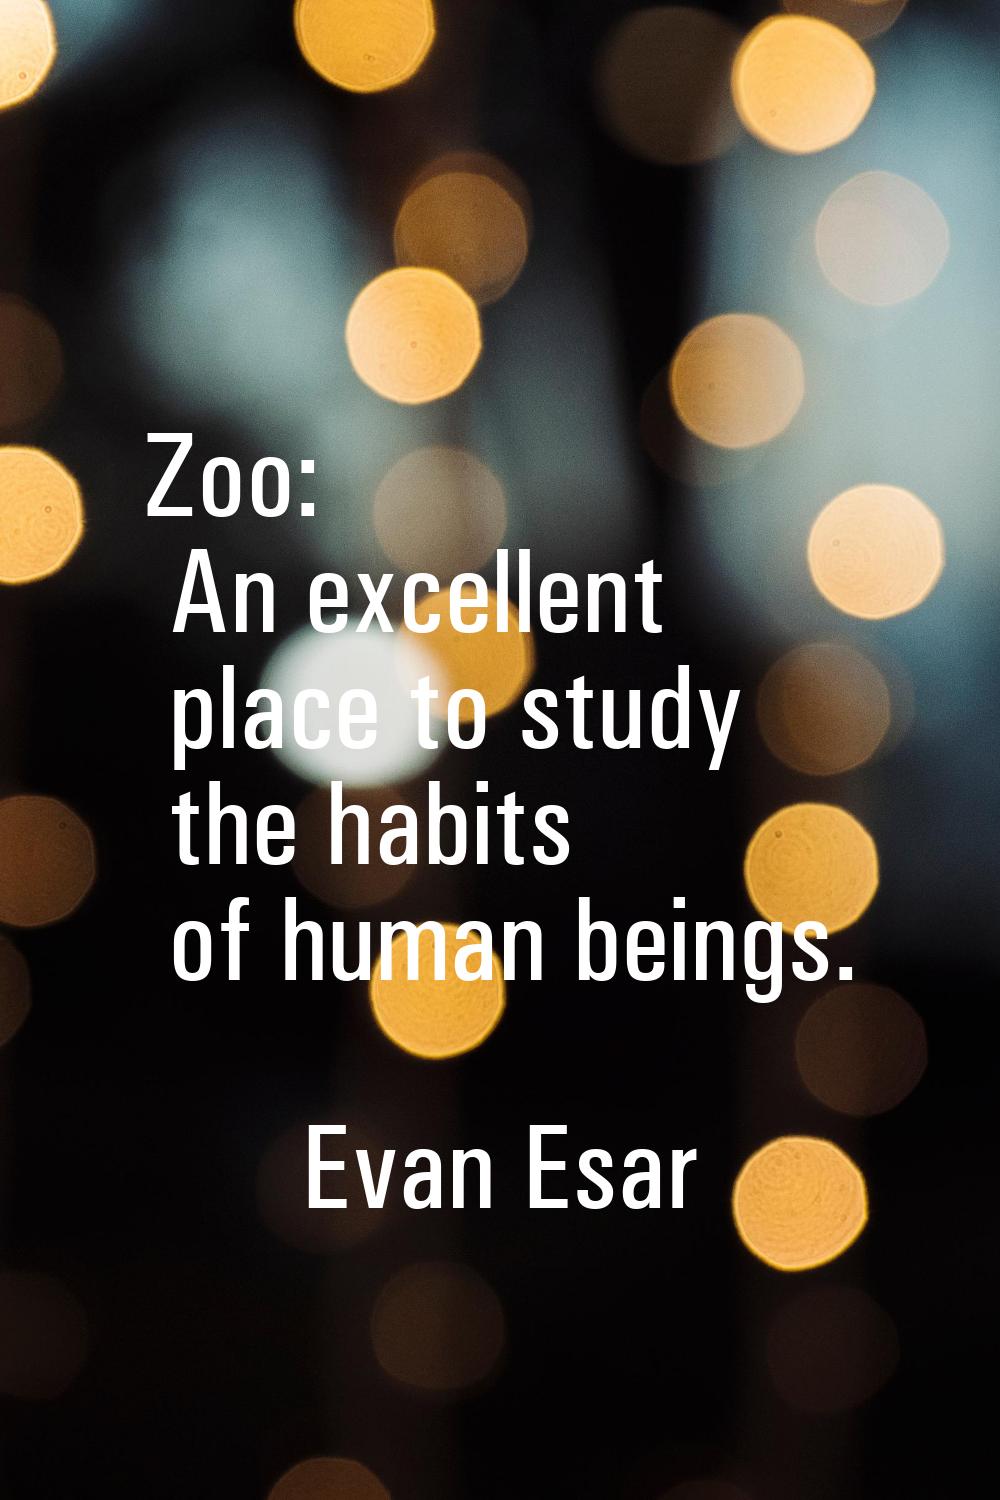 Zoo: An excellent place to study the habits of human beings.